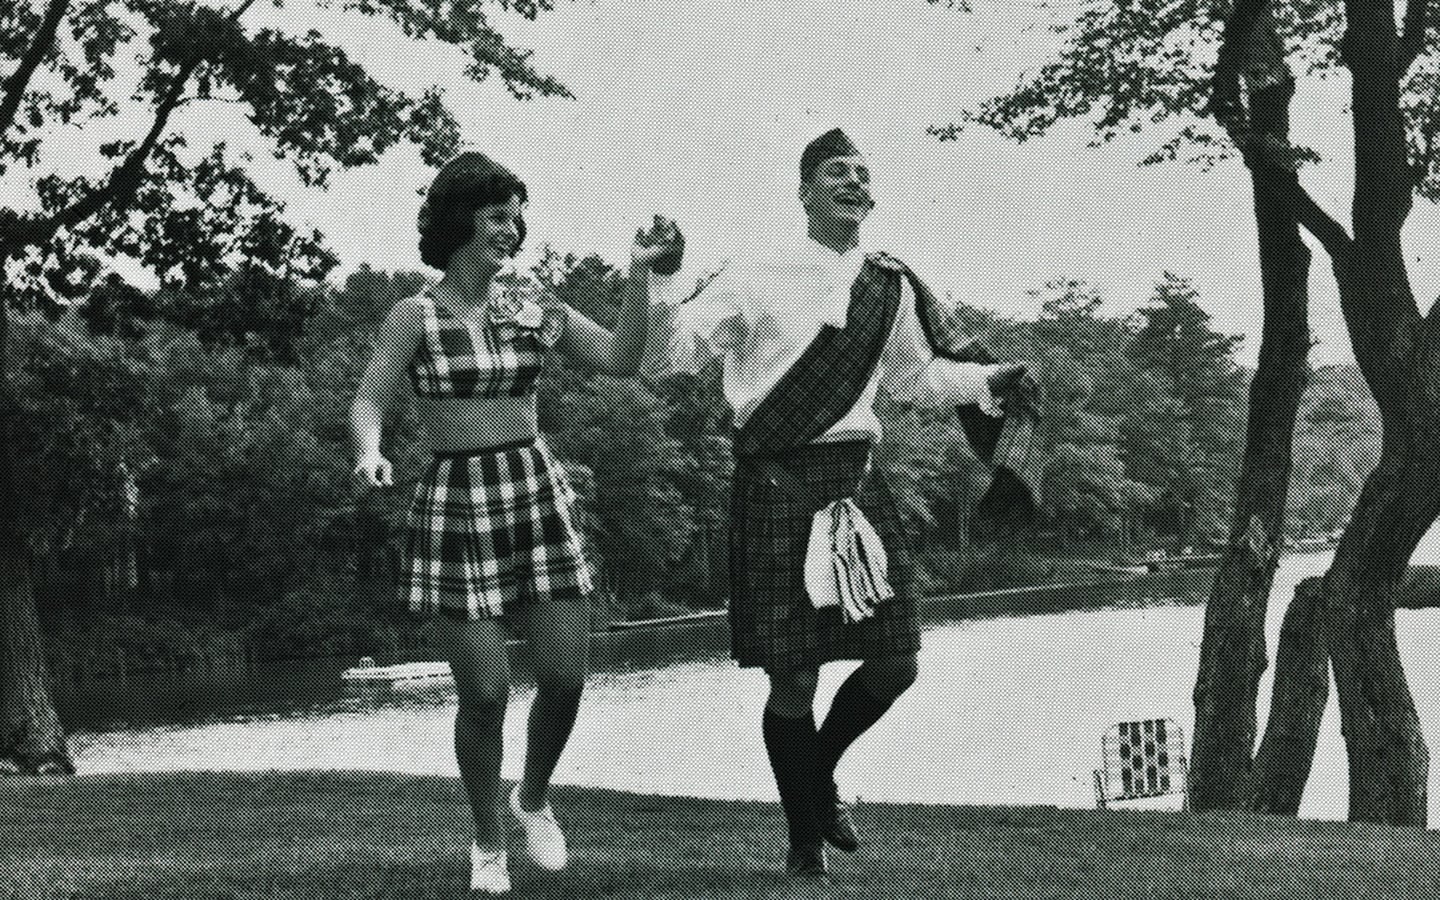 Historic photo of woman dancing with a man in Scottish clothes.